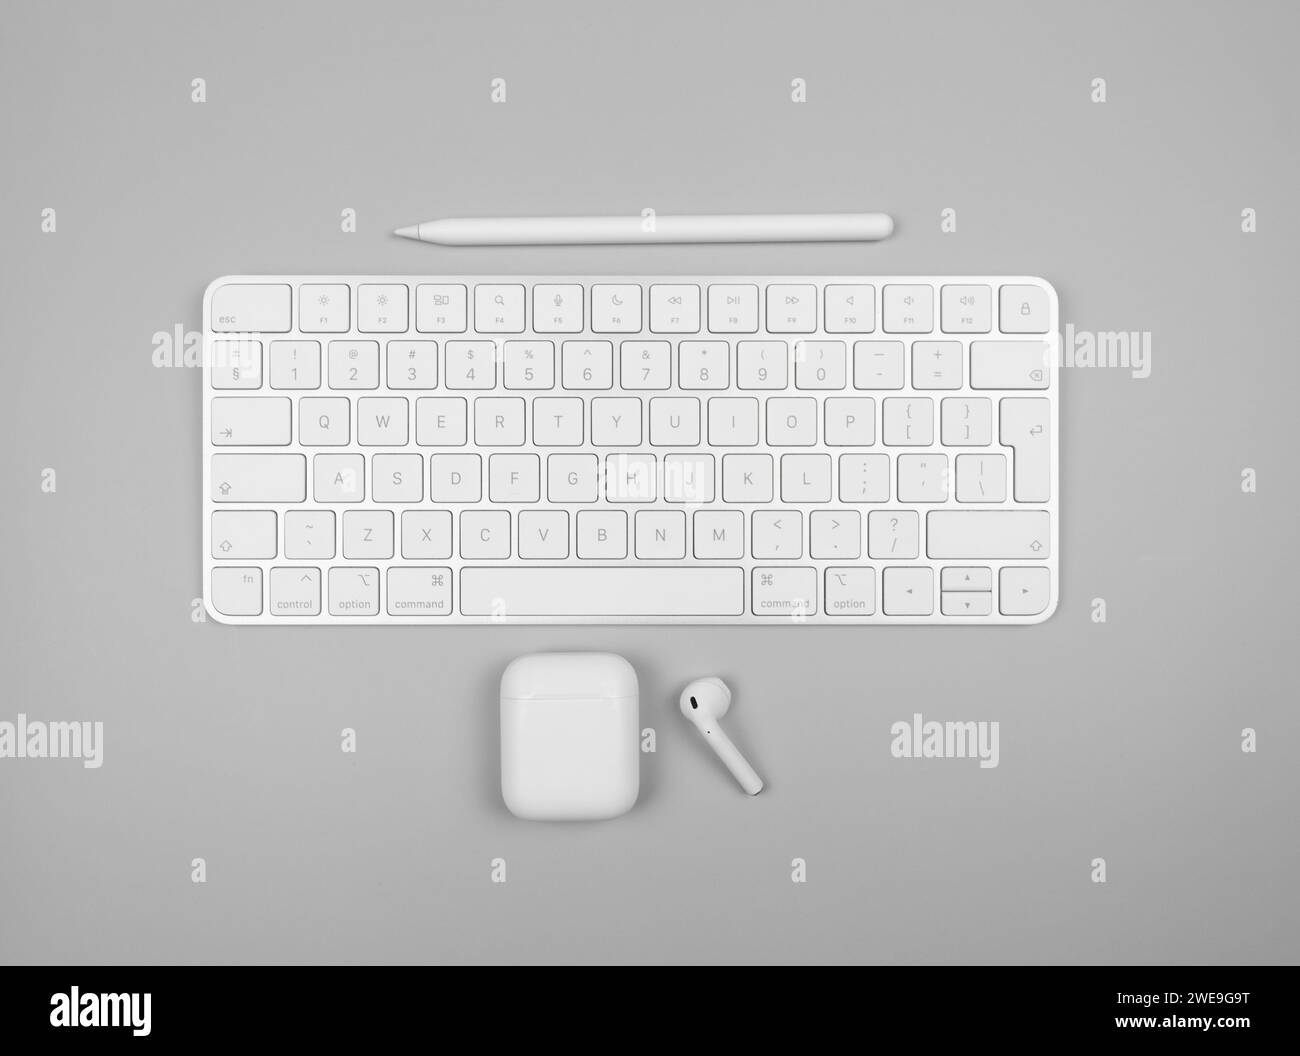 Top view of white keyboard, earphone case and pen on light grey background. Modern office flat lay, copy space. Stock Photo